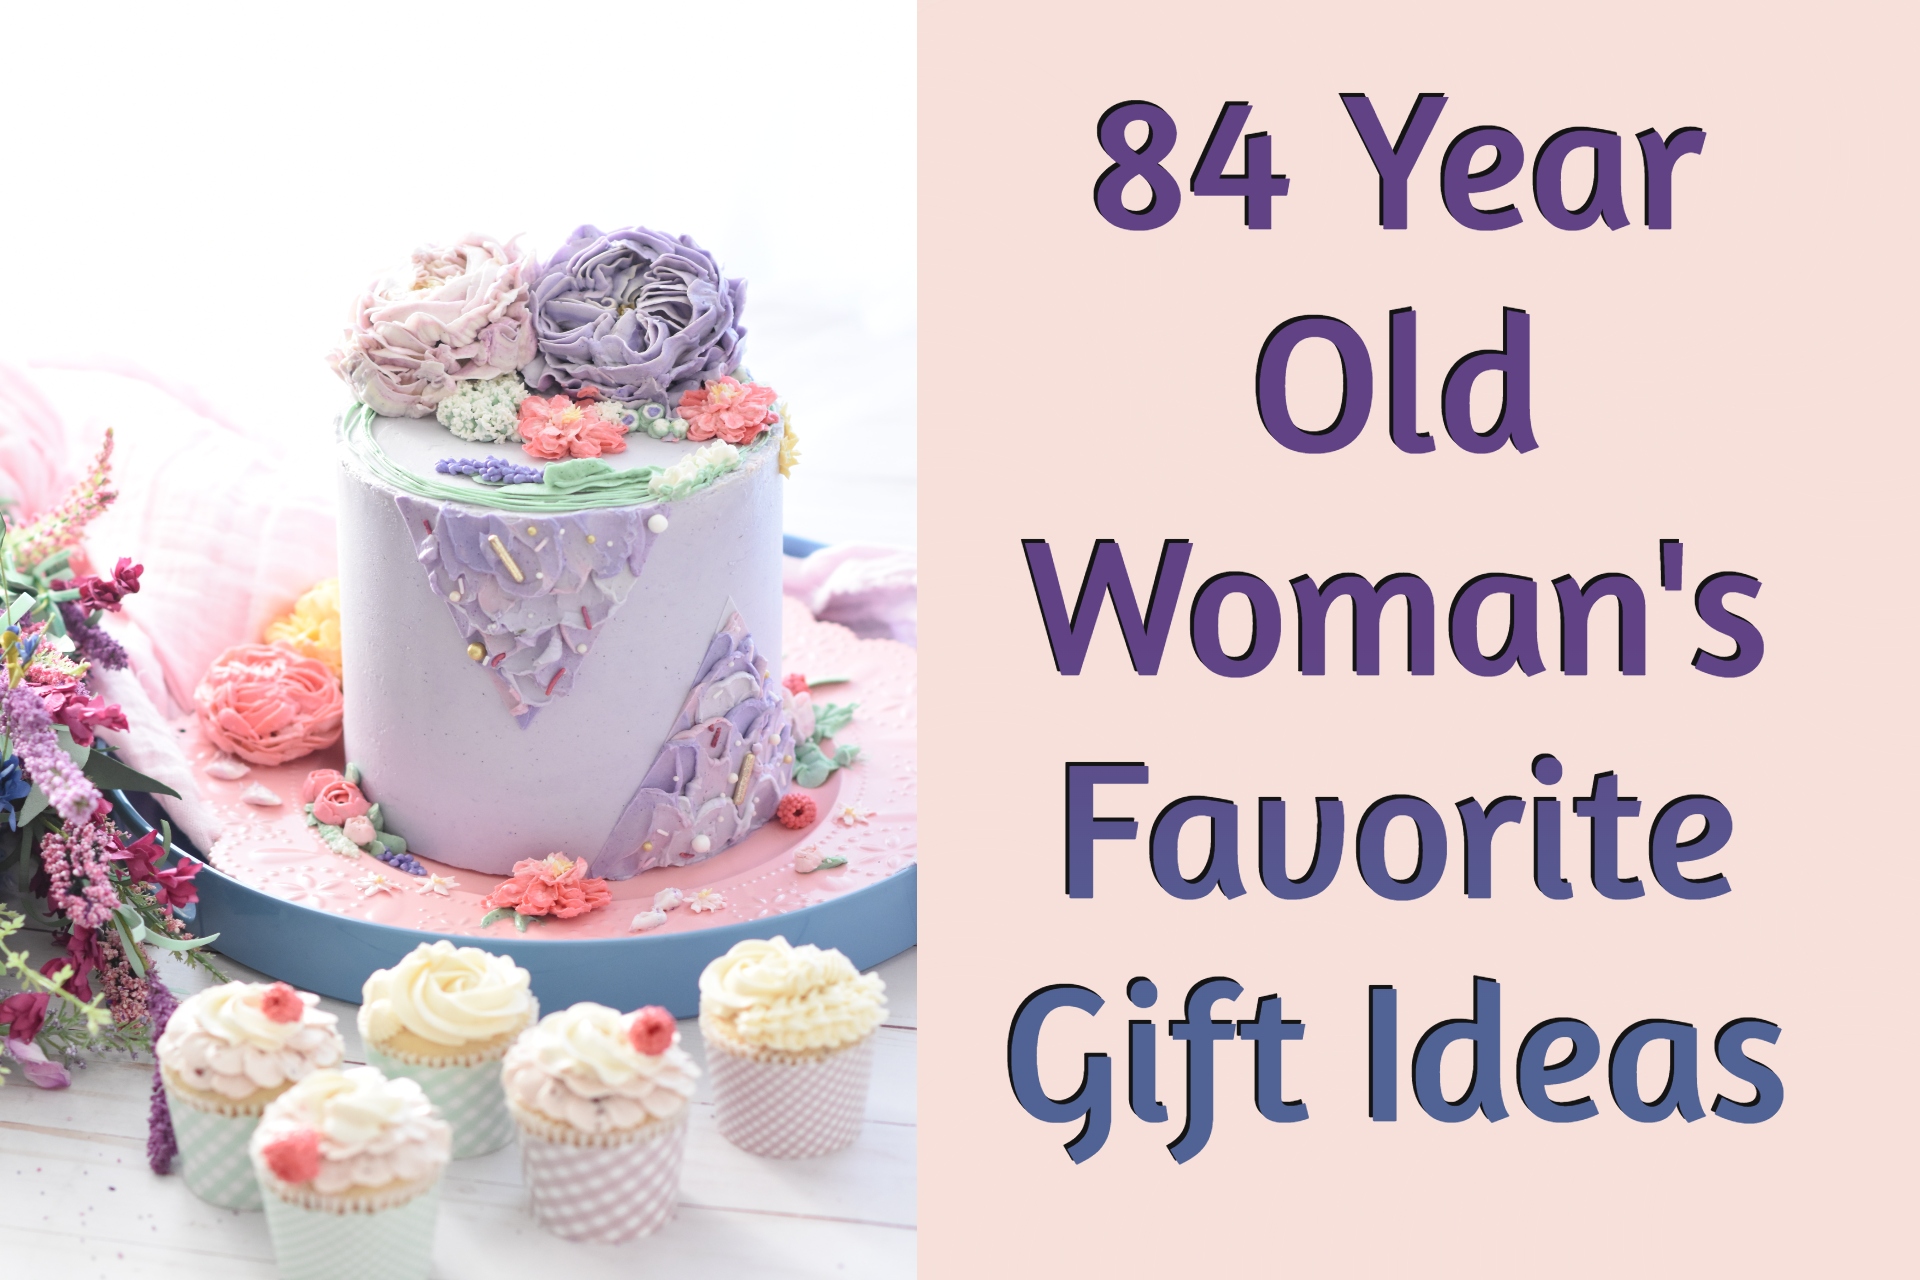 Cover image of gift ideas for 84-year-old woman by Giftsedge